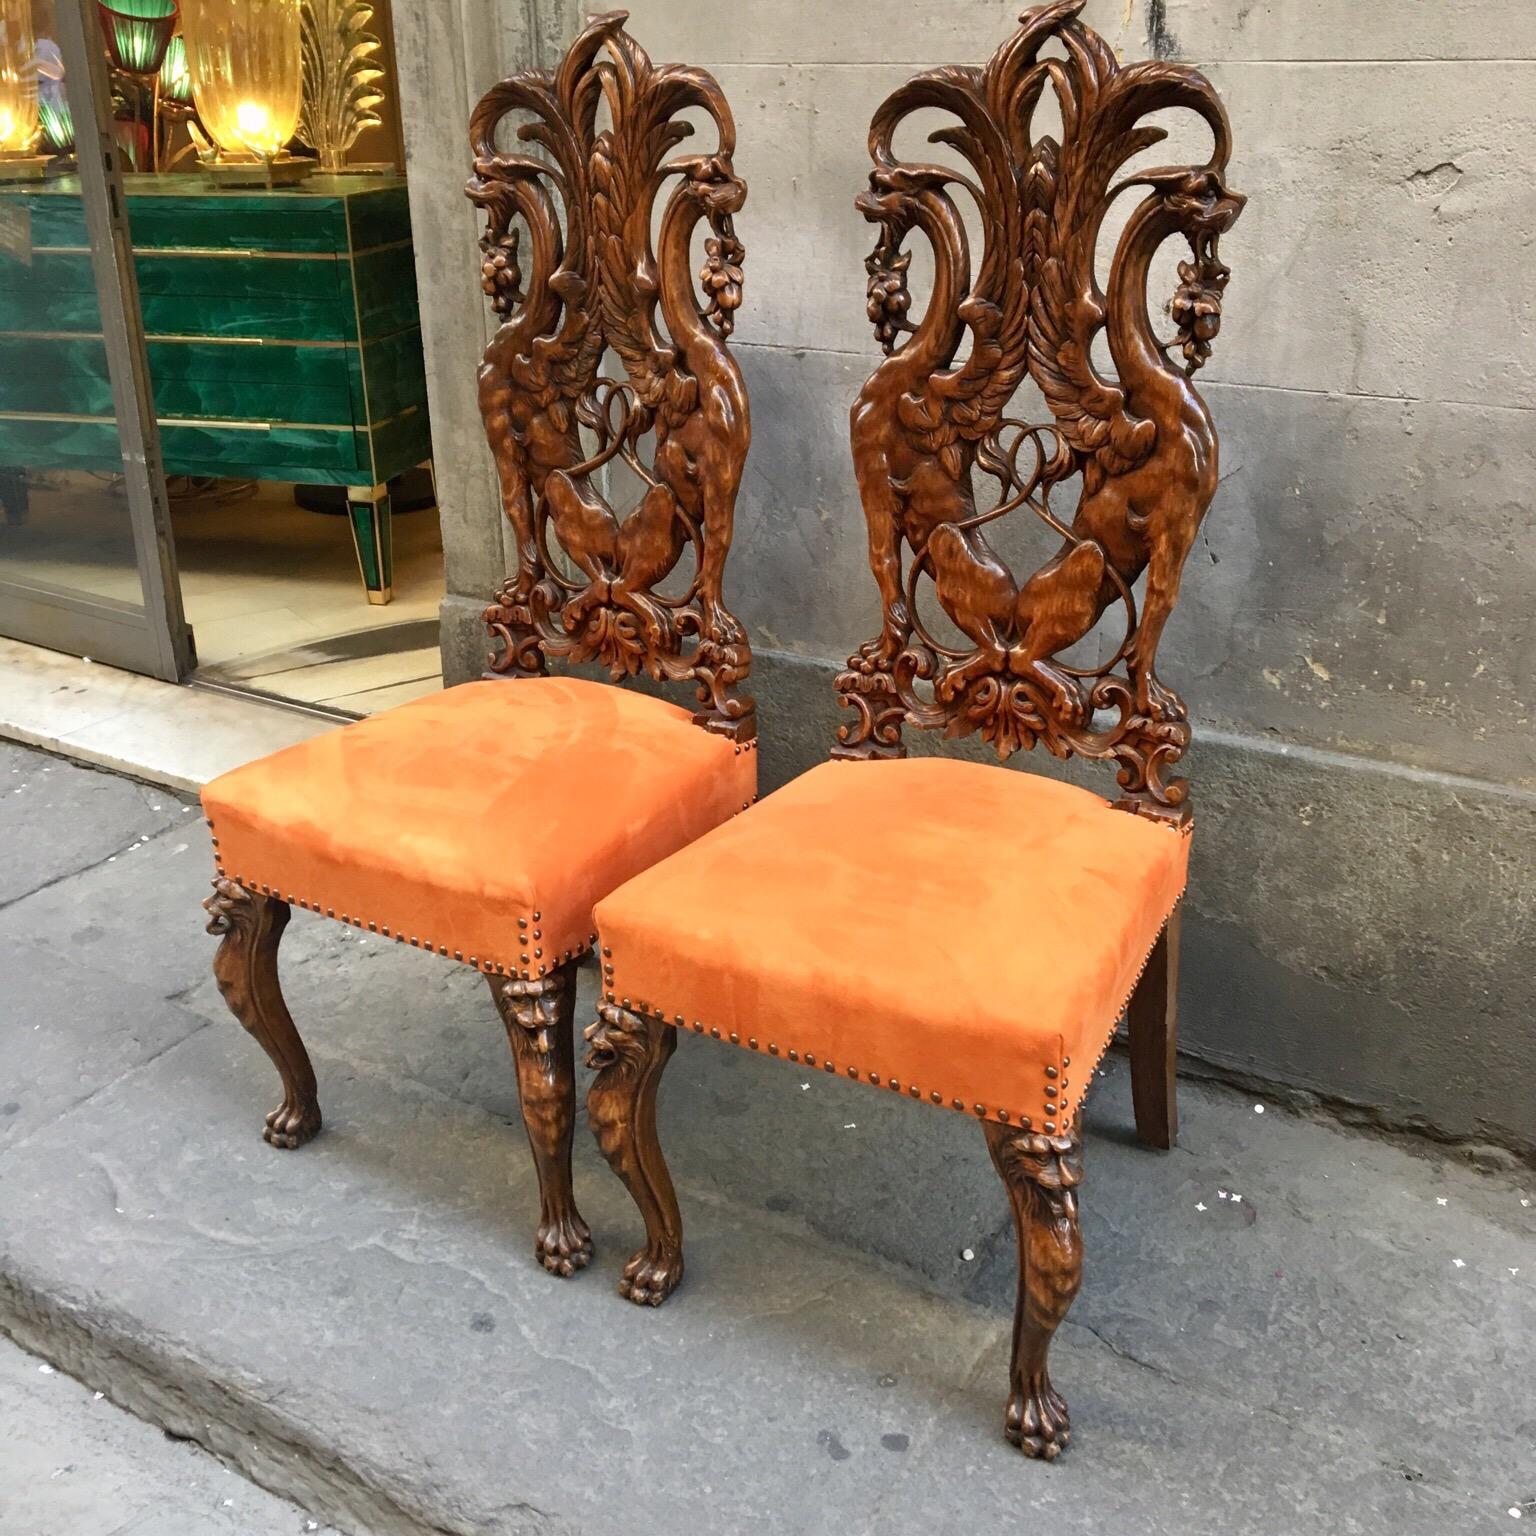 Pair of hand carved Renaissance-style wooden chairs. The back of the chair is made of mahogany wood carved subject Renaissance Florentine art. Newly-upholstered seat with orange alcantara, stain-resistant fabric by Dedar.